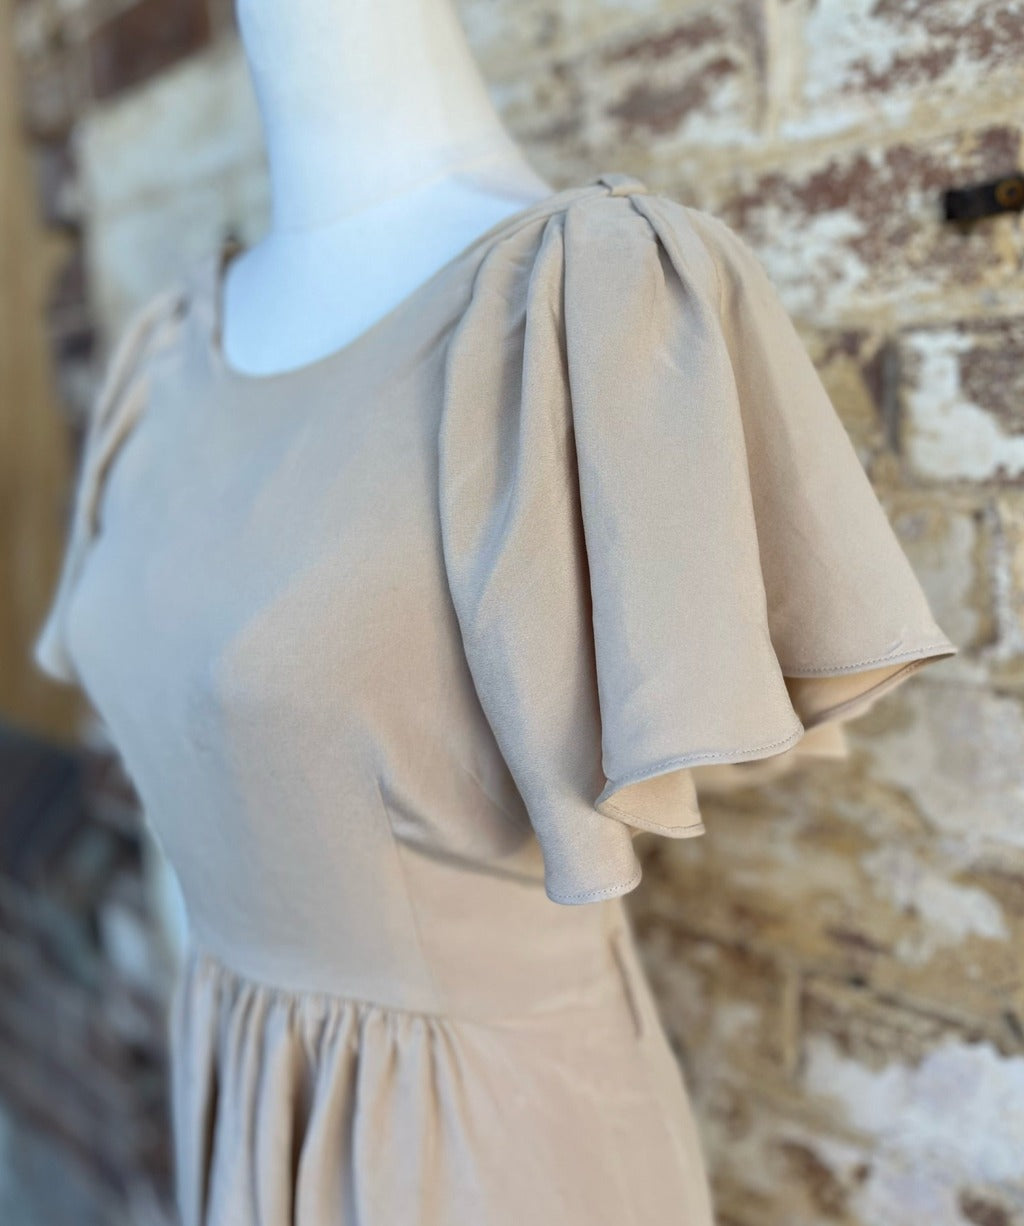 Thurley dress side view